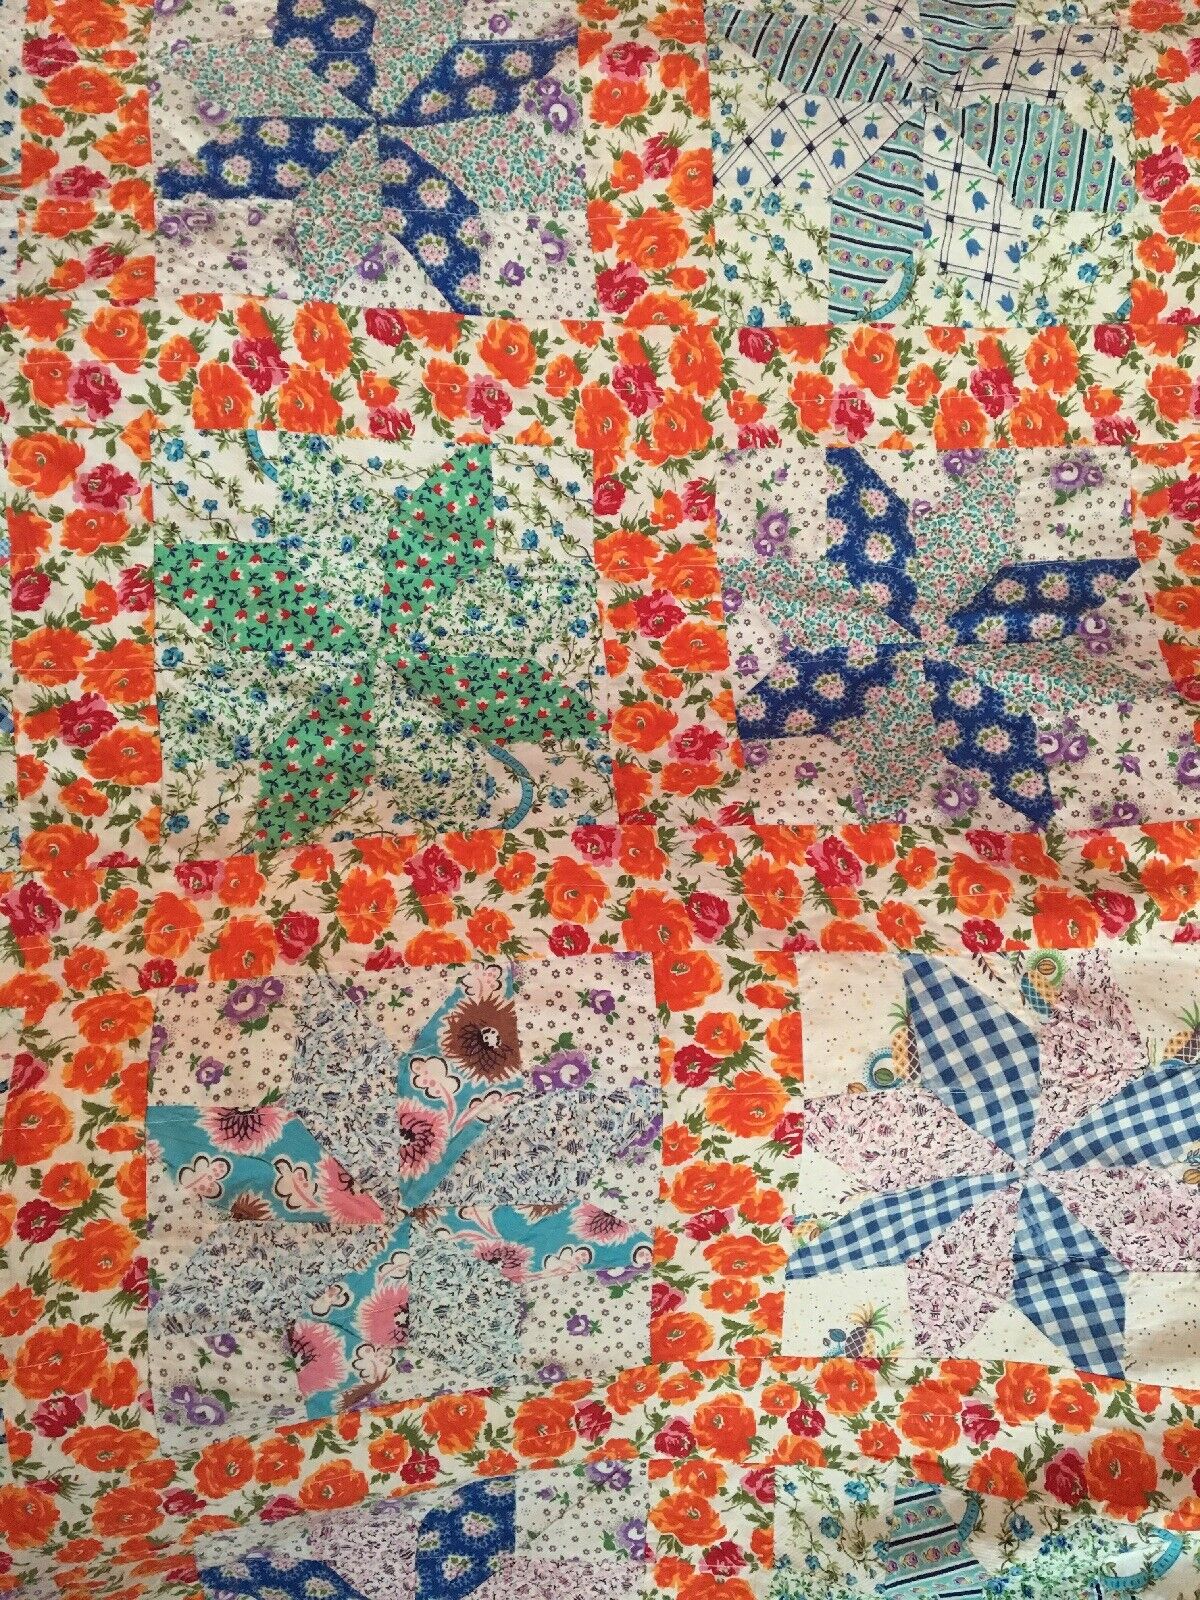 Antique Calico Quilt Floral Stripes and Stars Print with Great Fabrics